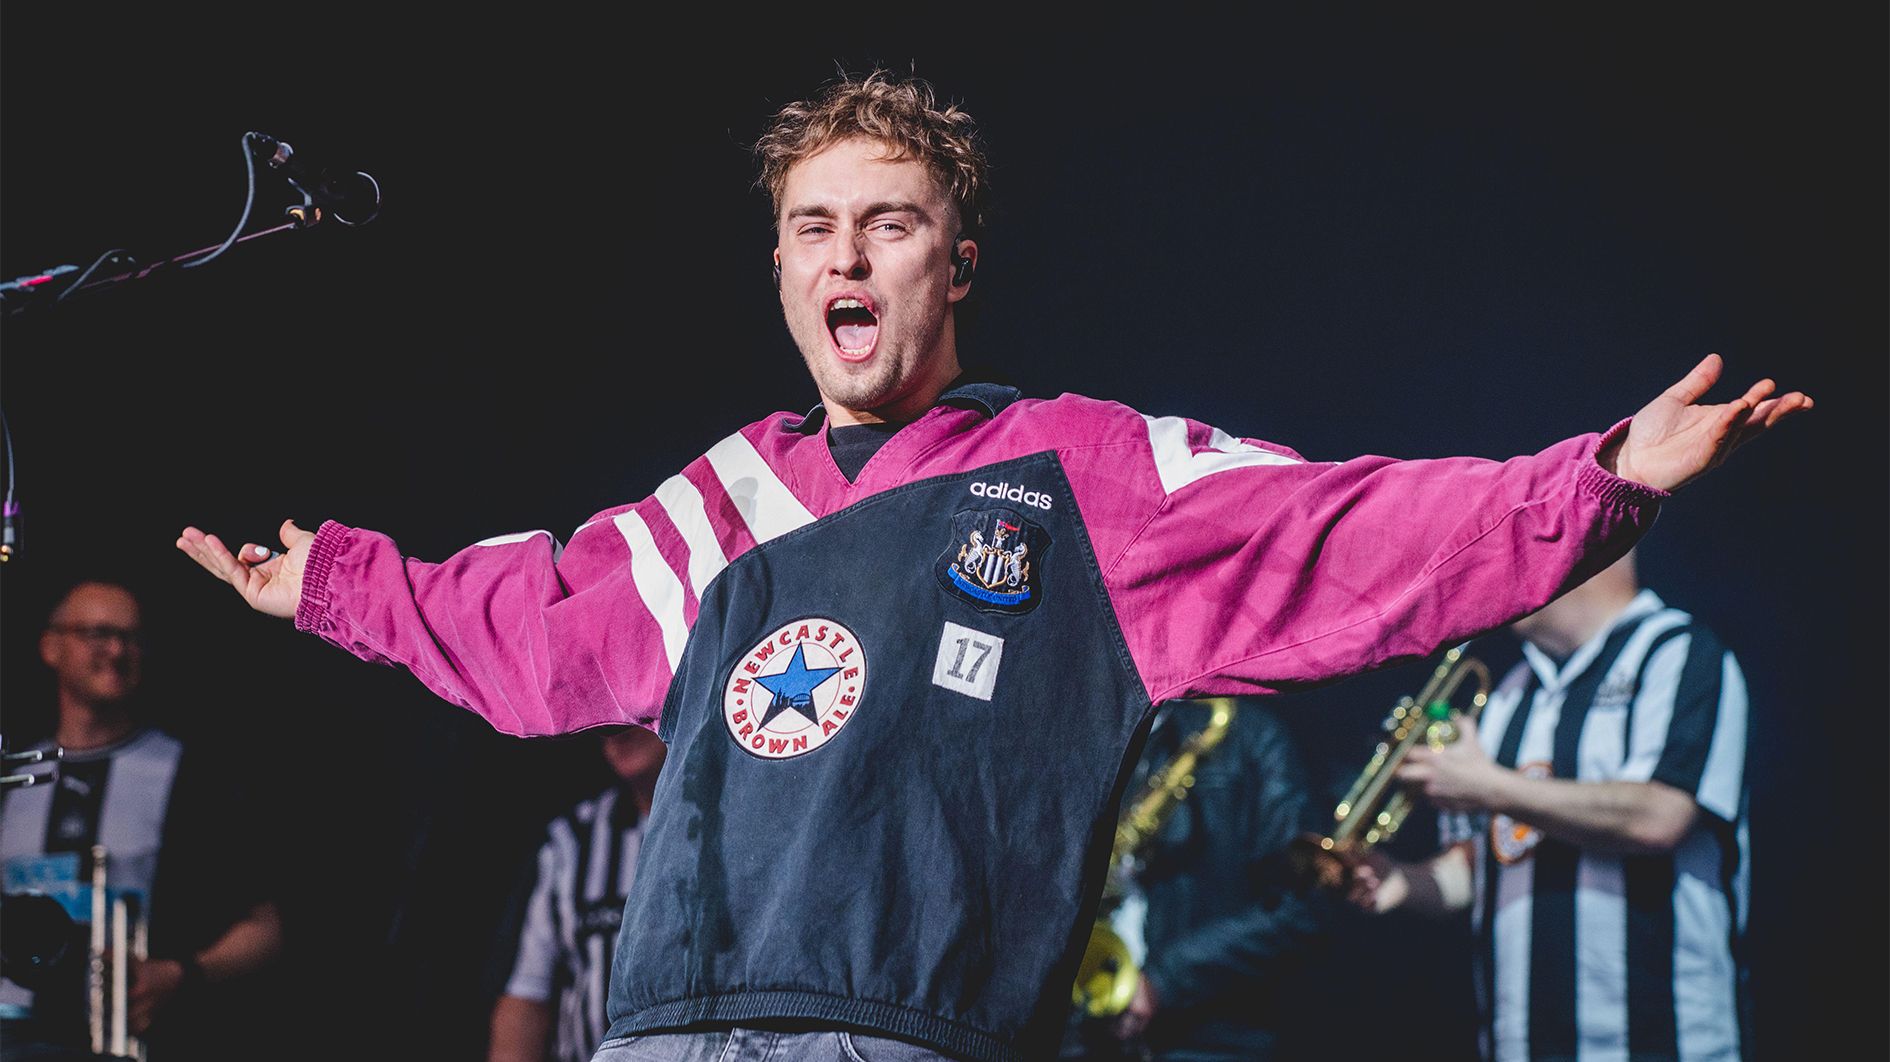 Sam Fender's shows at St. James' Park in Newcastle Upon Tyne Photos